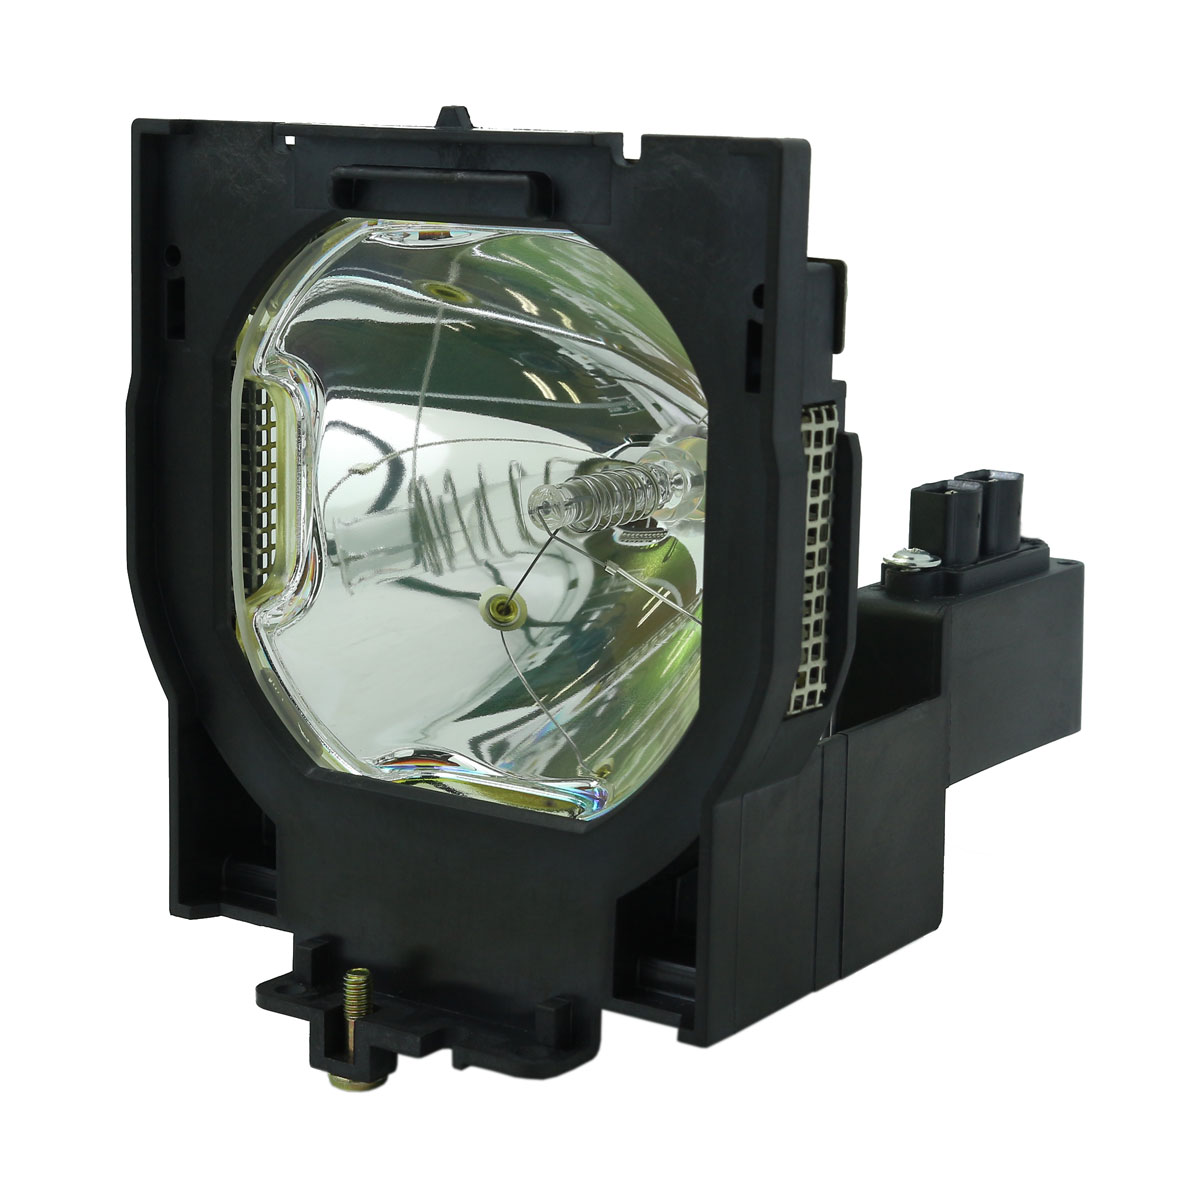 Buyquest RRL8  OEM Replacement Projector Lamp for Christie. Includes New Philips UHP 200W Bulb and Housing